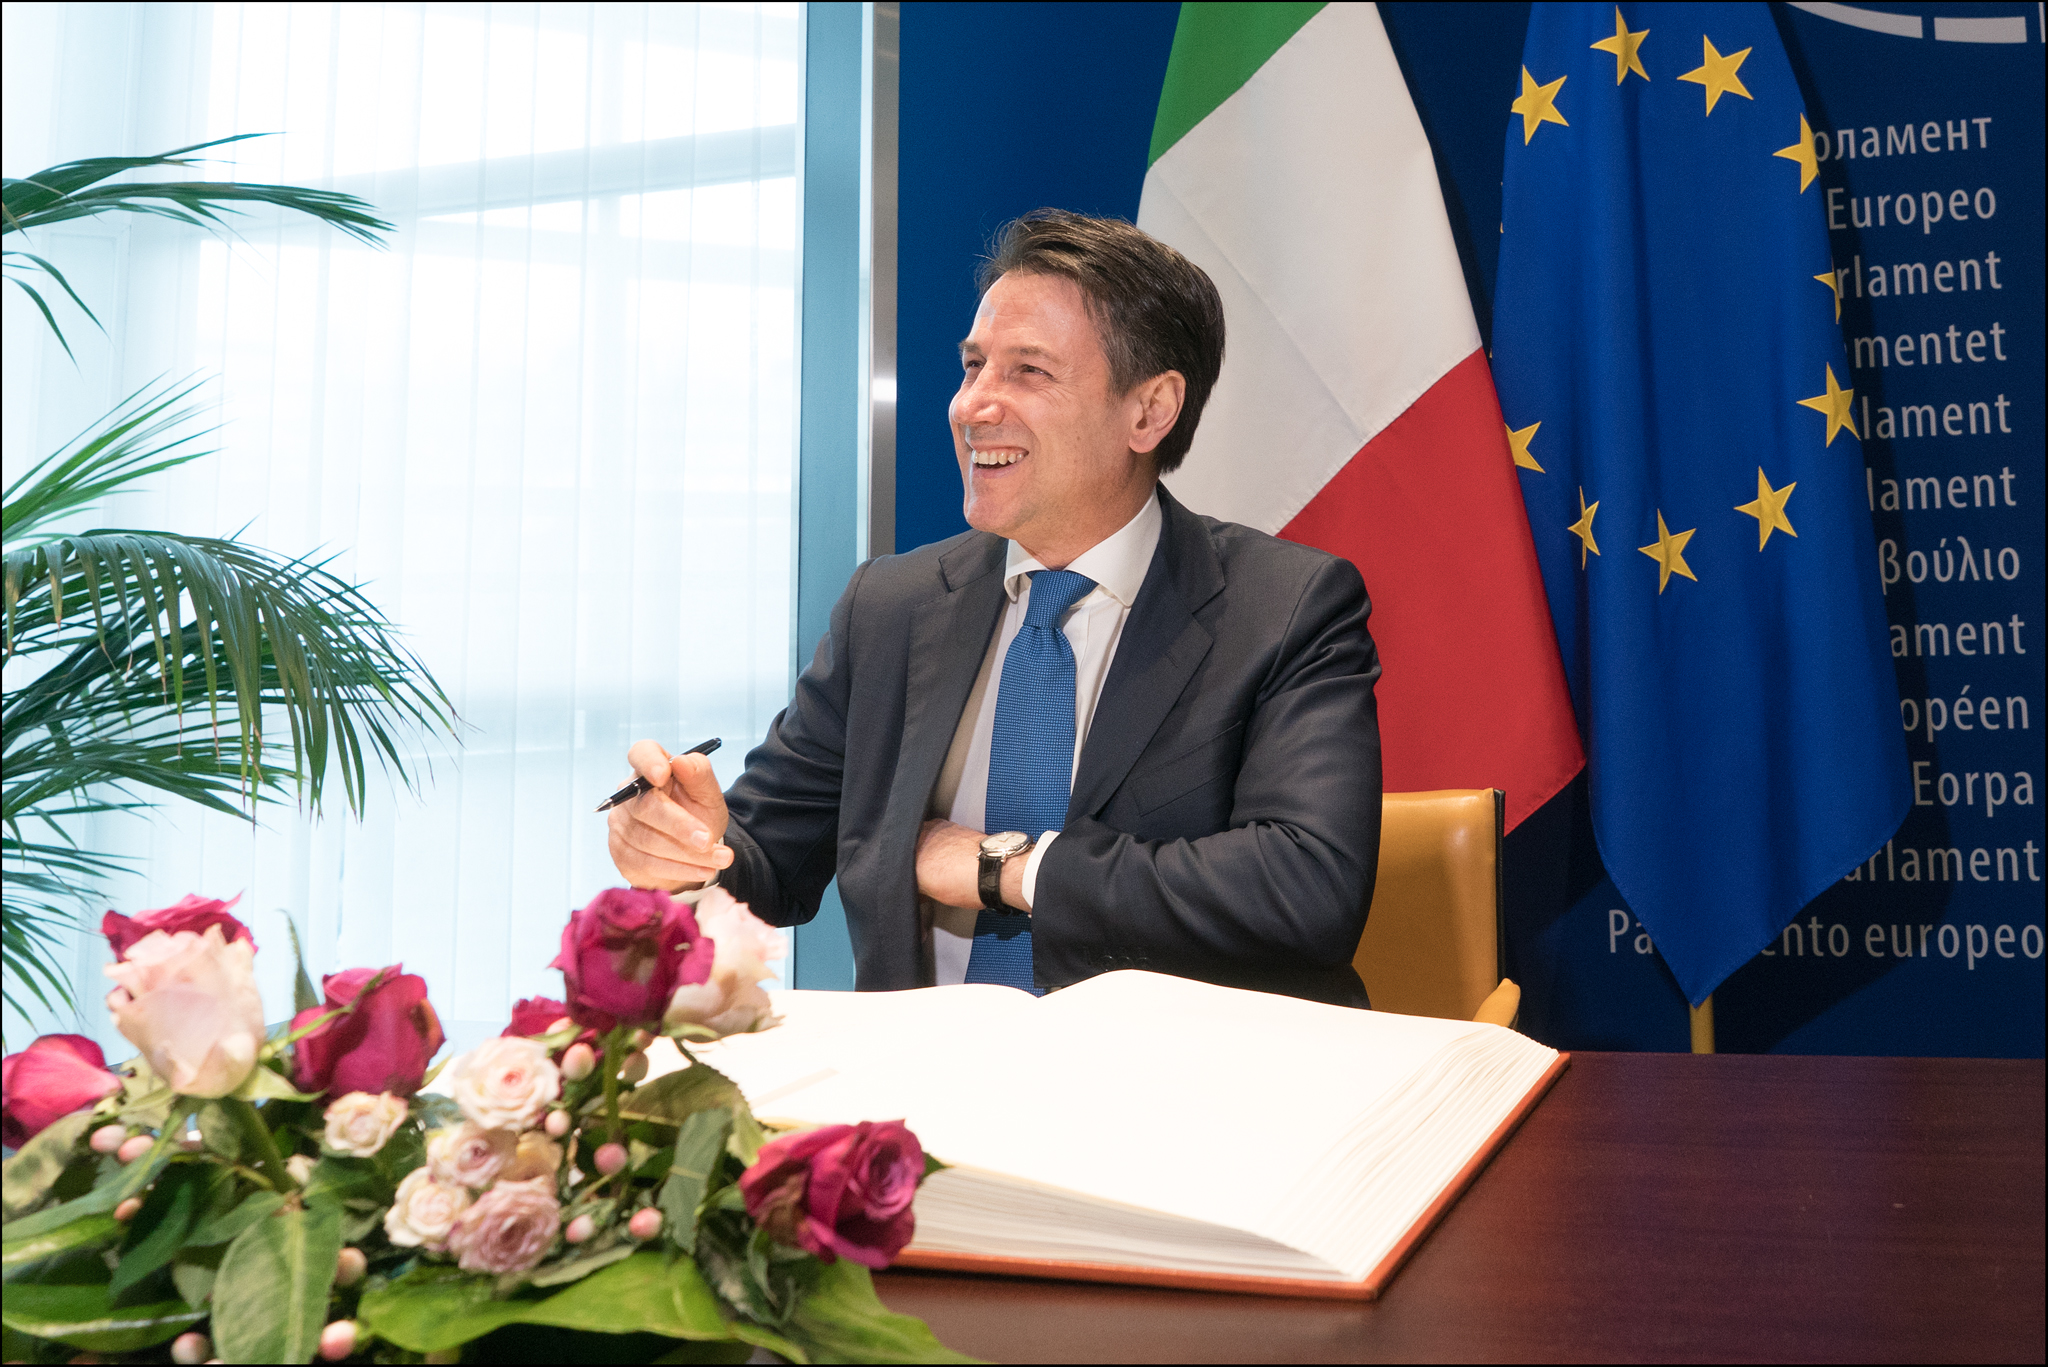 Corduwener - Prime Minister Giuseppe Conte just arrived at the European Parliament to present his vision on the #FutureofEurope in february 2019. Europees Parlement